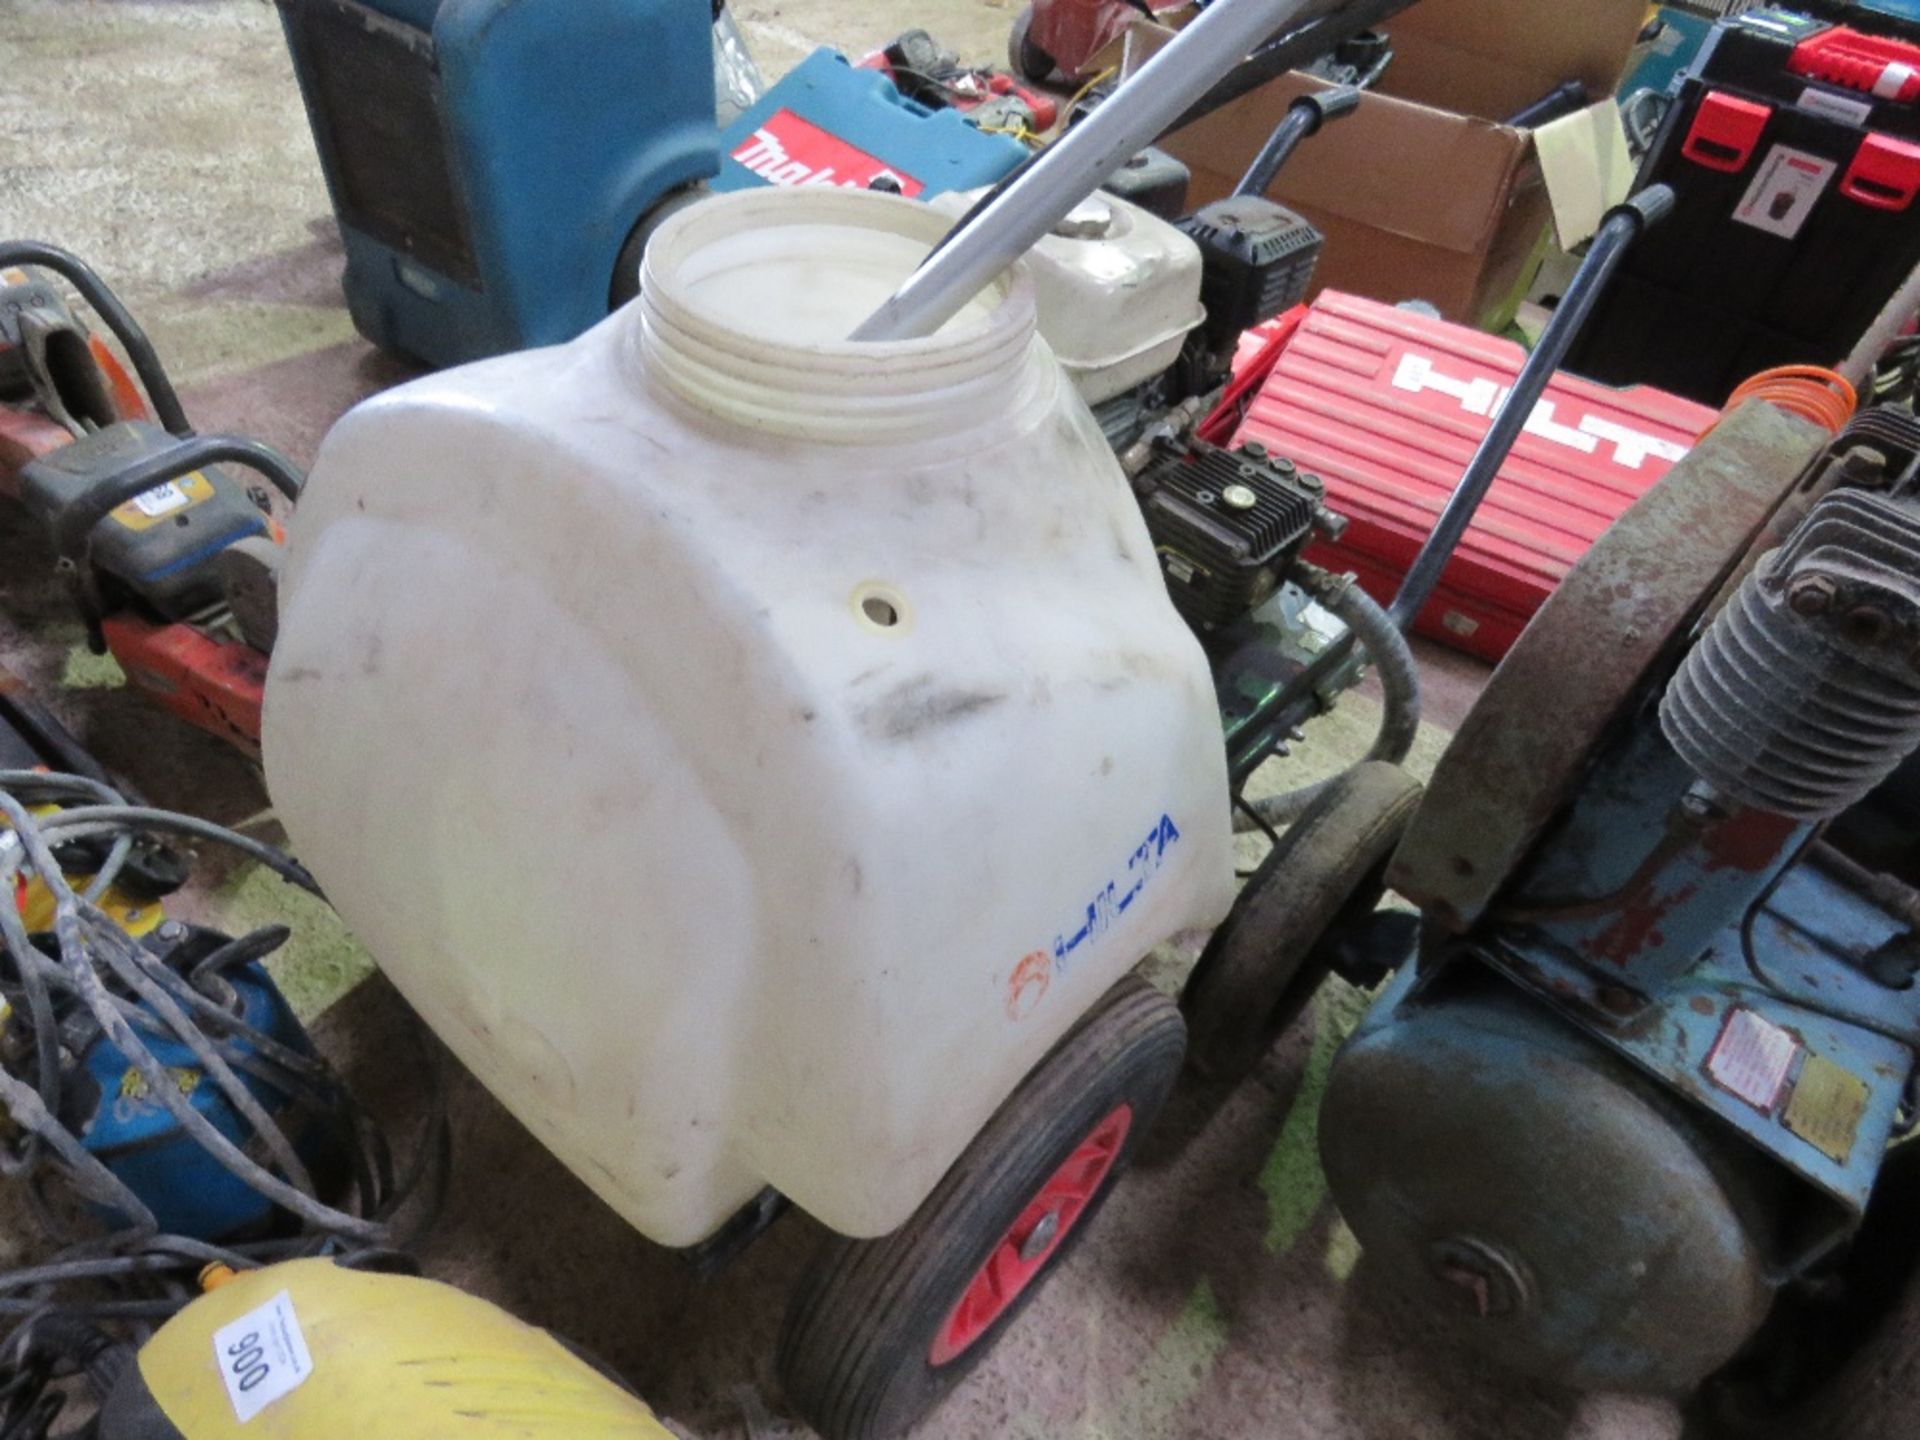 HILTA HONDA ENGINED PRESSURE WASHER BOWSER BARROW WITH EXTRA LONG LANCE. - Image 7 of 9